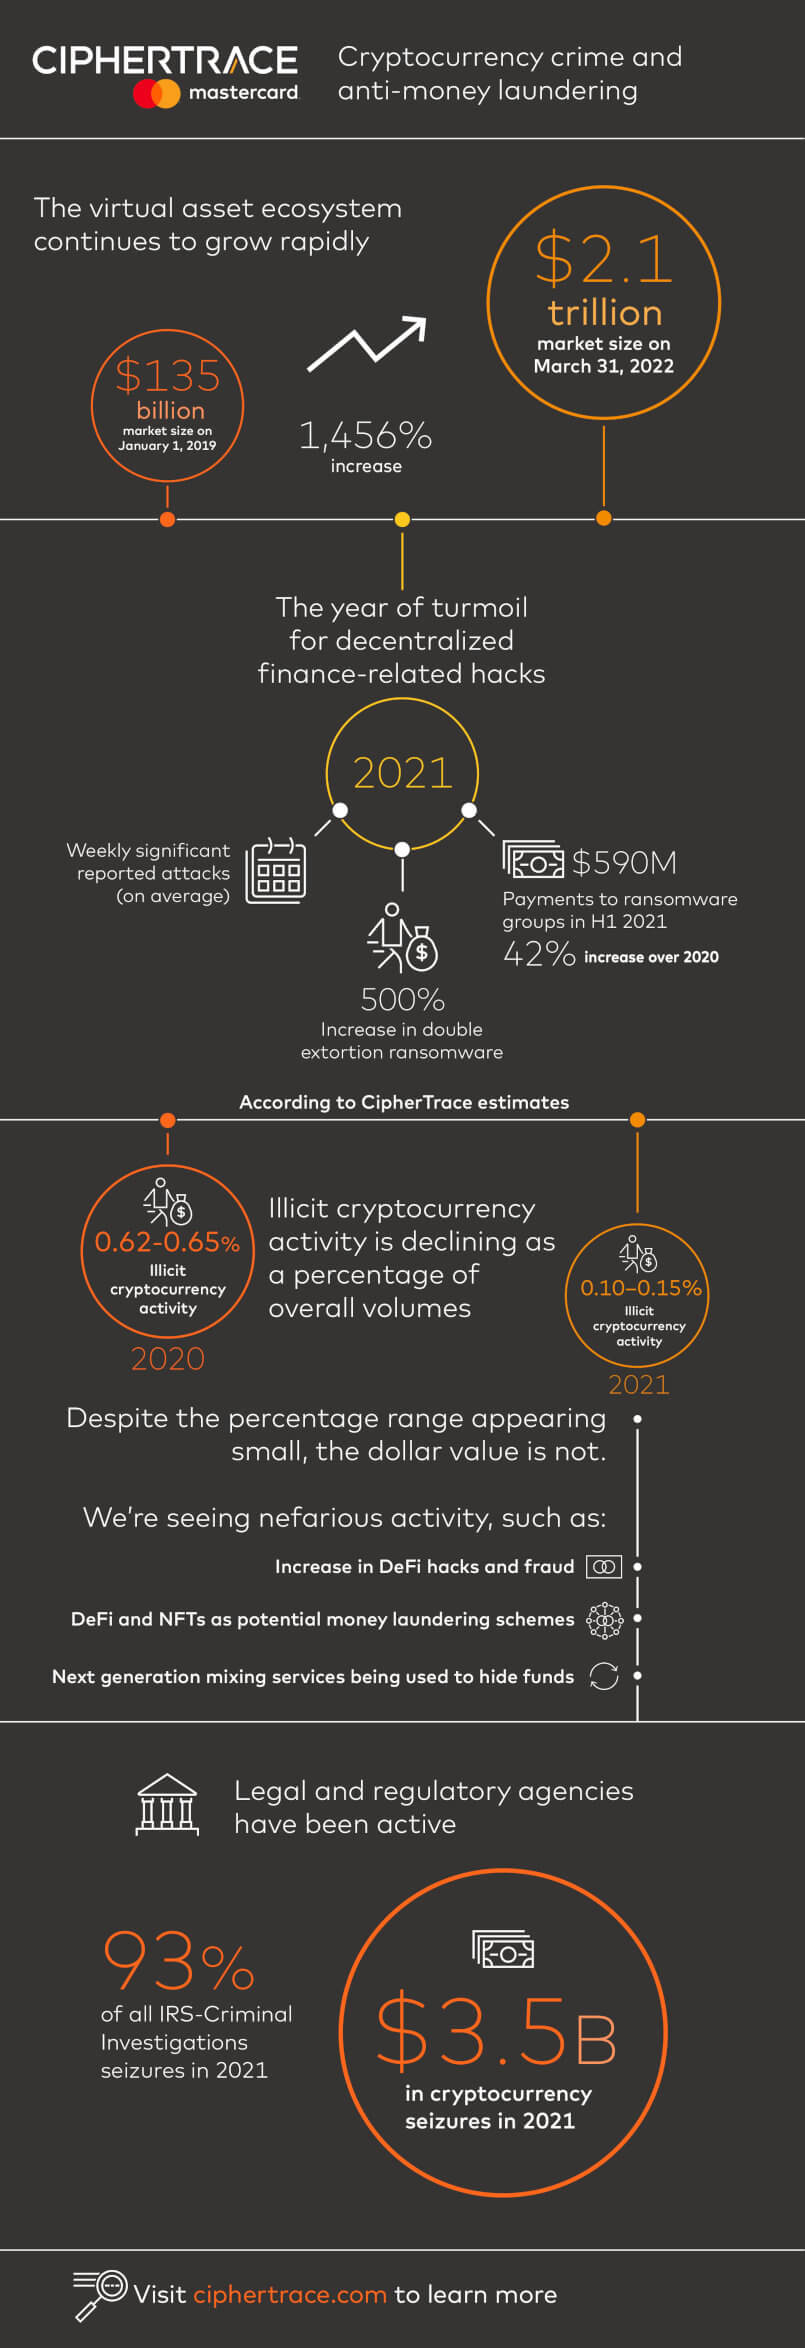  ciphertrace crypto ecosystem report decline activity shows 